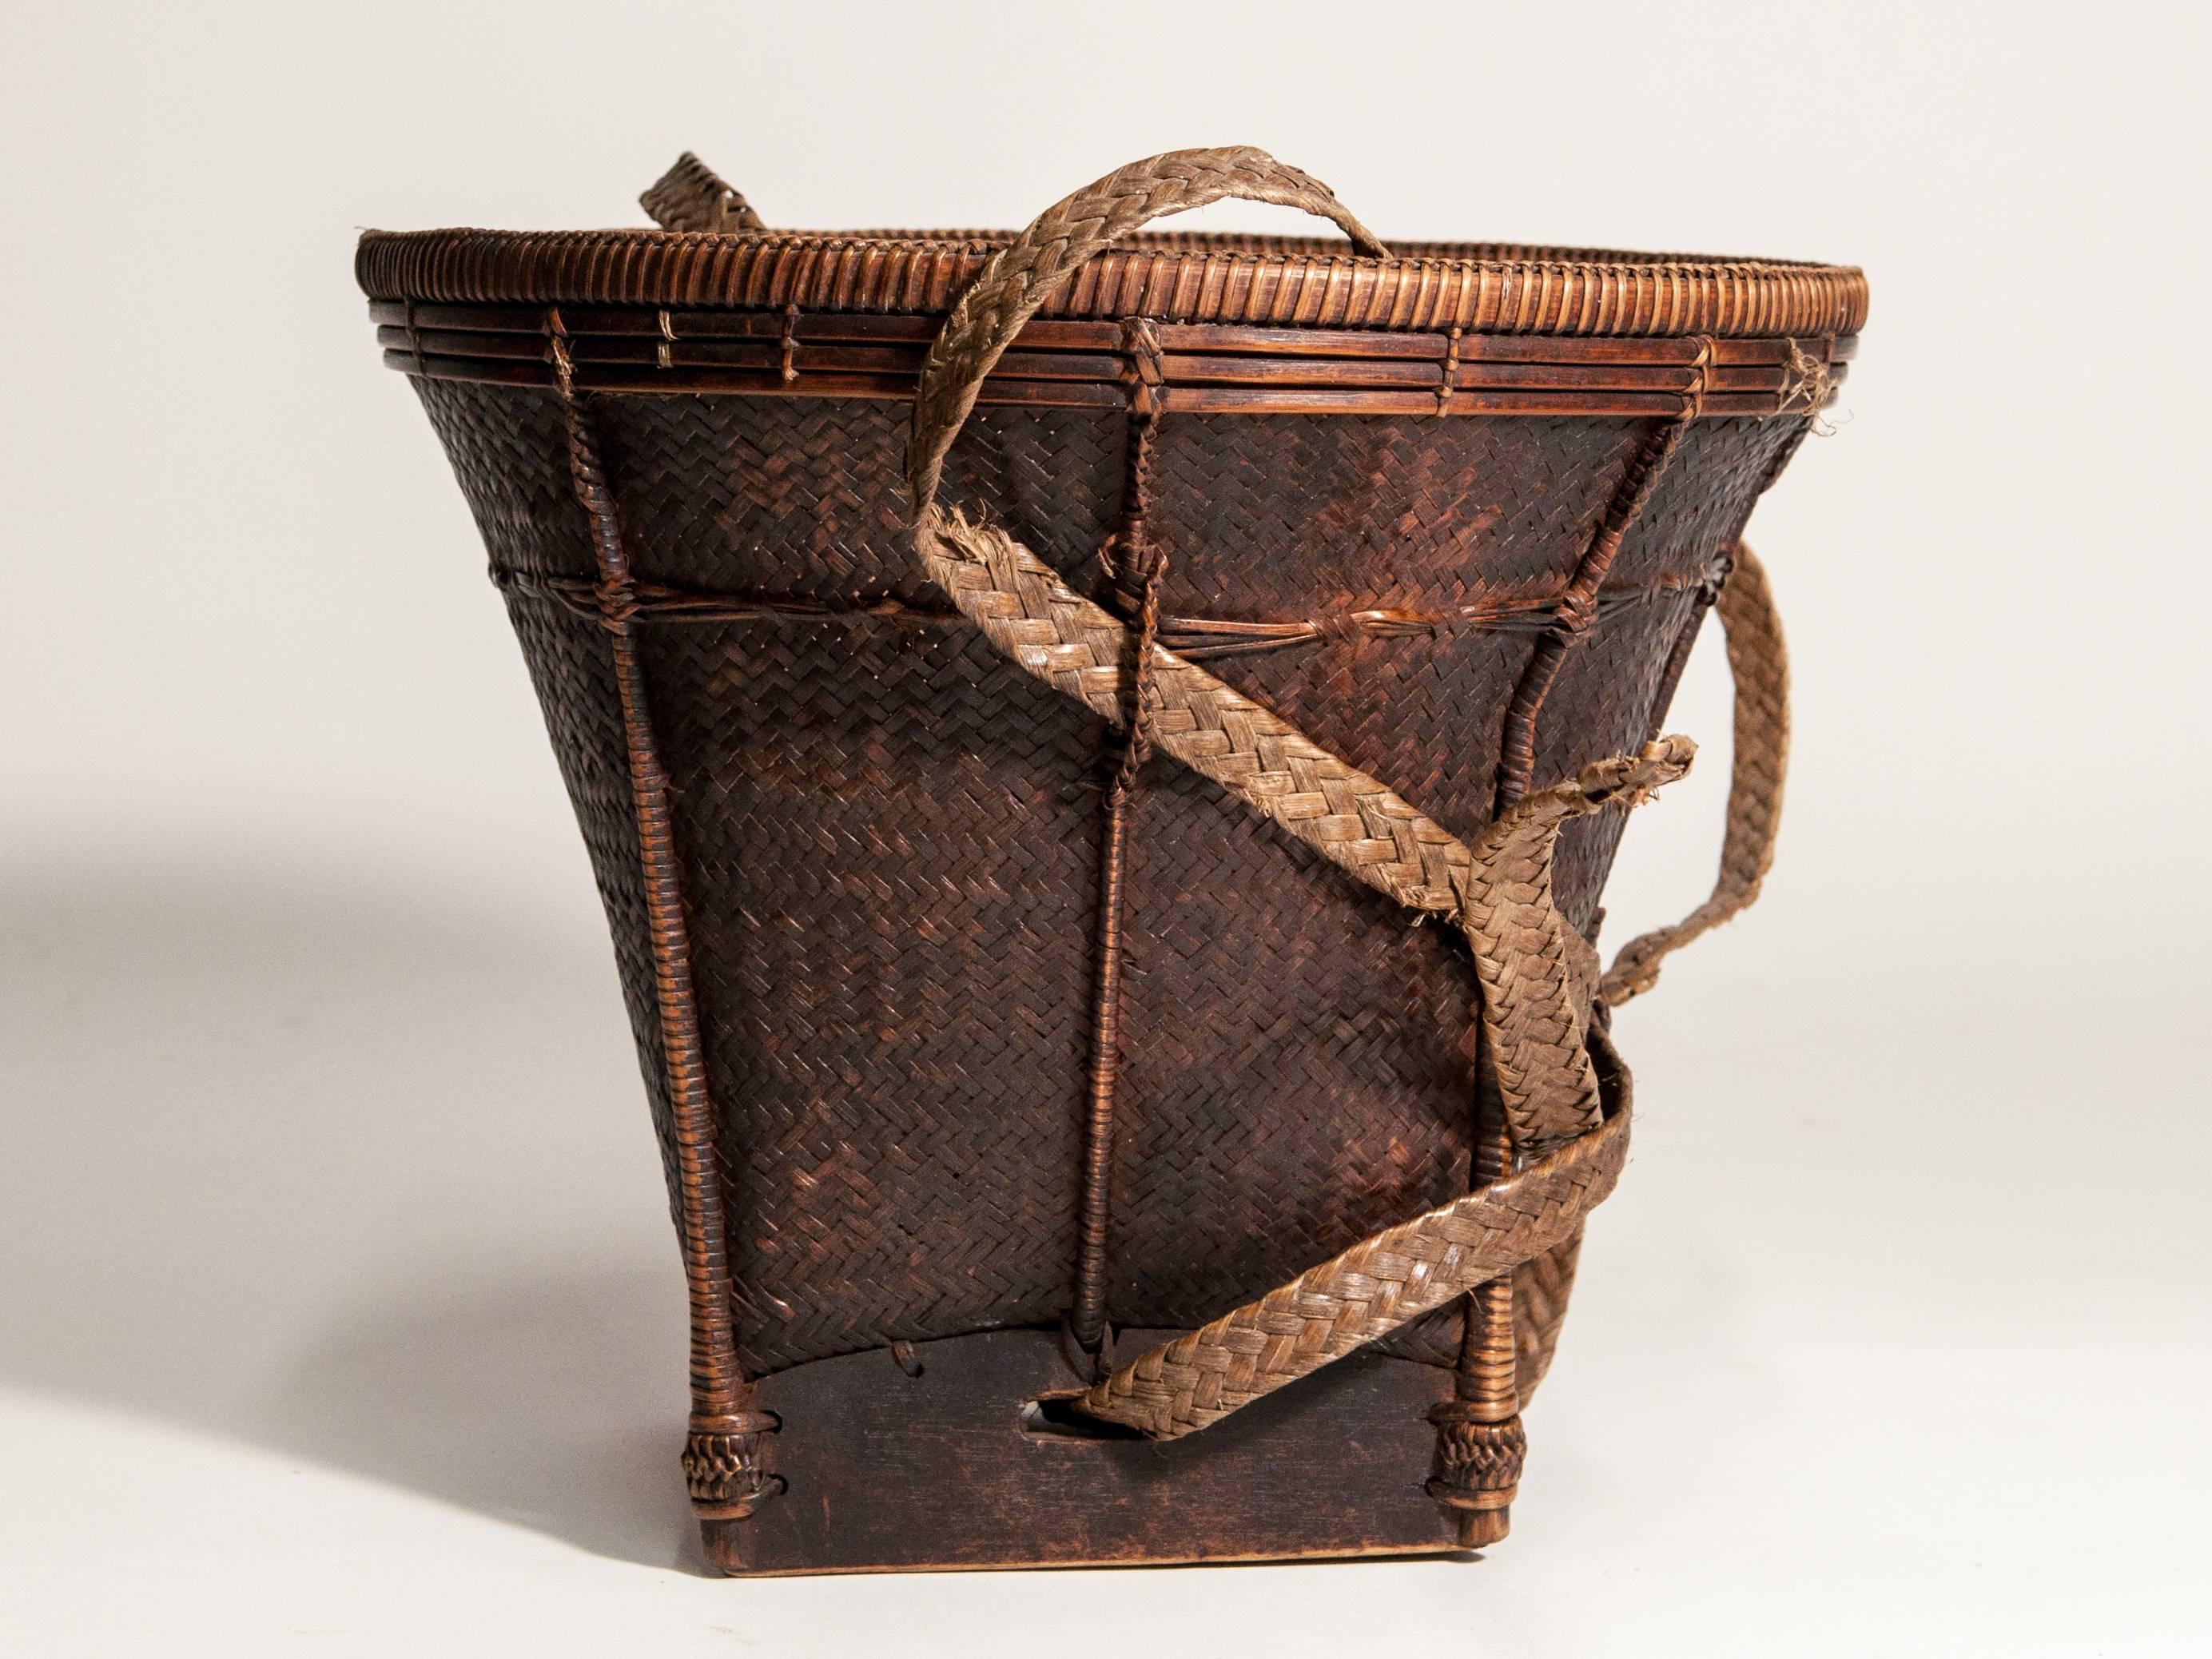 Hand-Crafted Tribal Collecting Basket from the Ata Pue Area of Laos, Mid-20th Century, Bamboo